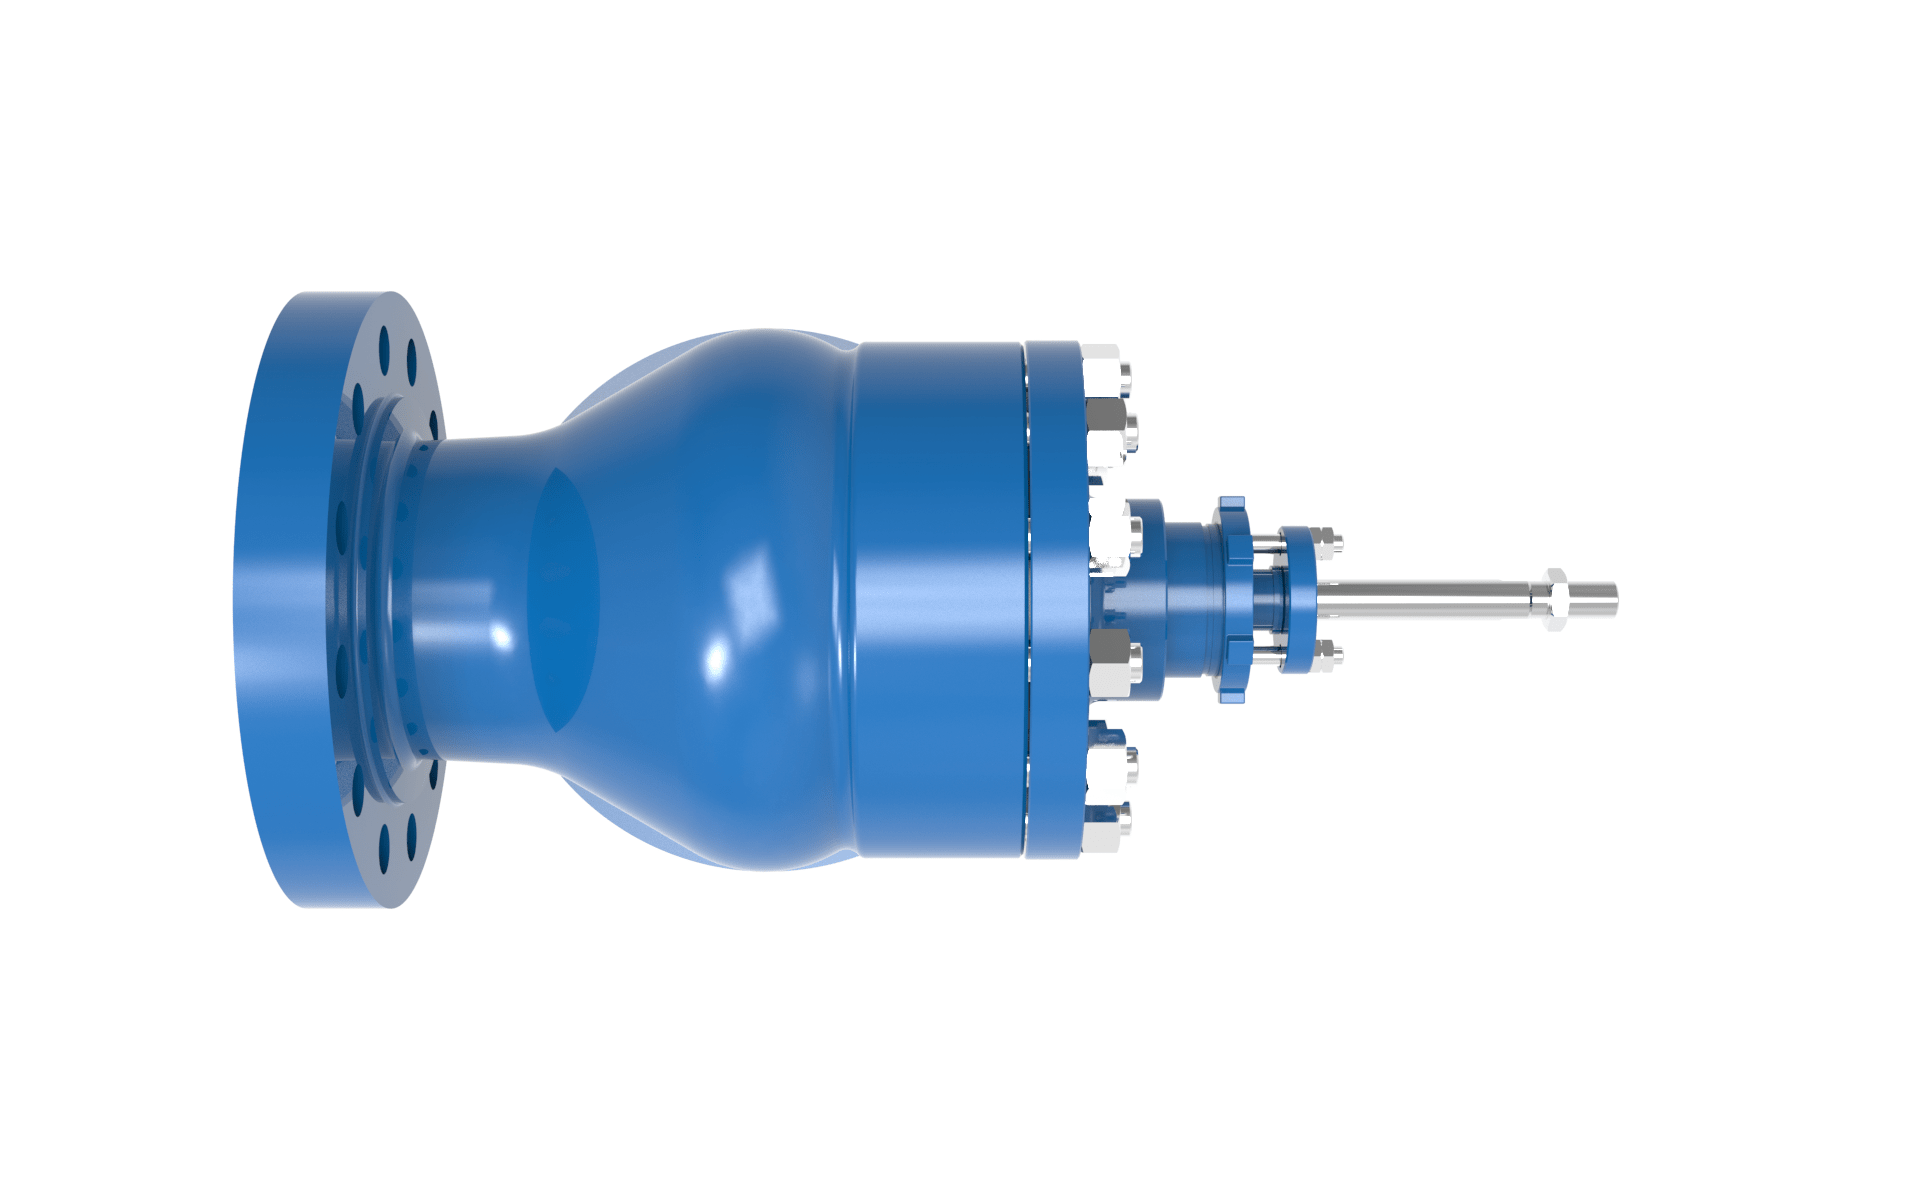 BLAKEBOROUGH® BV501 CAGE TRIM VALVES UP TO CLASS 600LB RATING right angled view top view